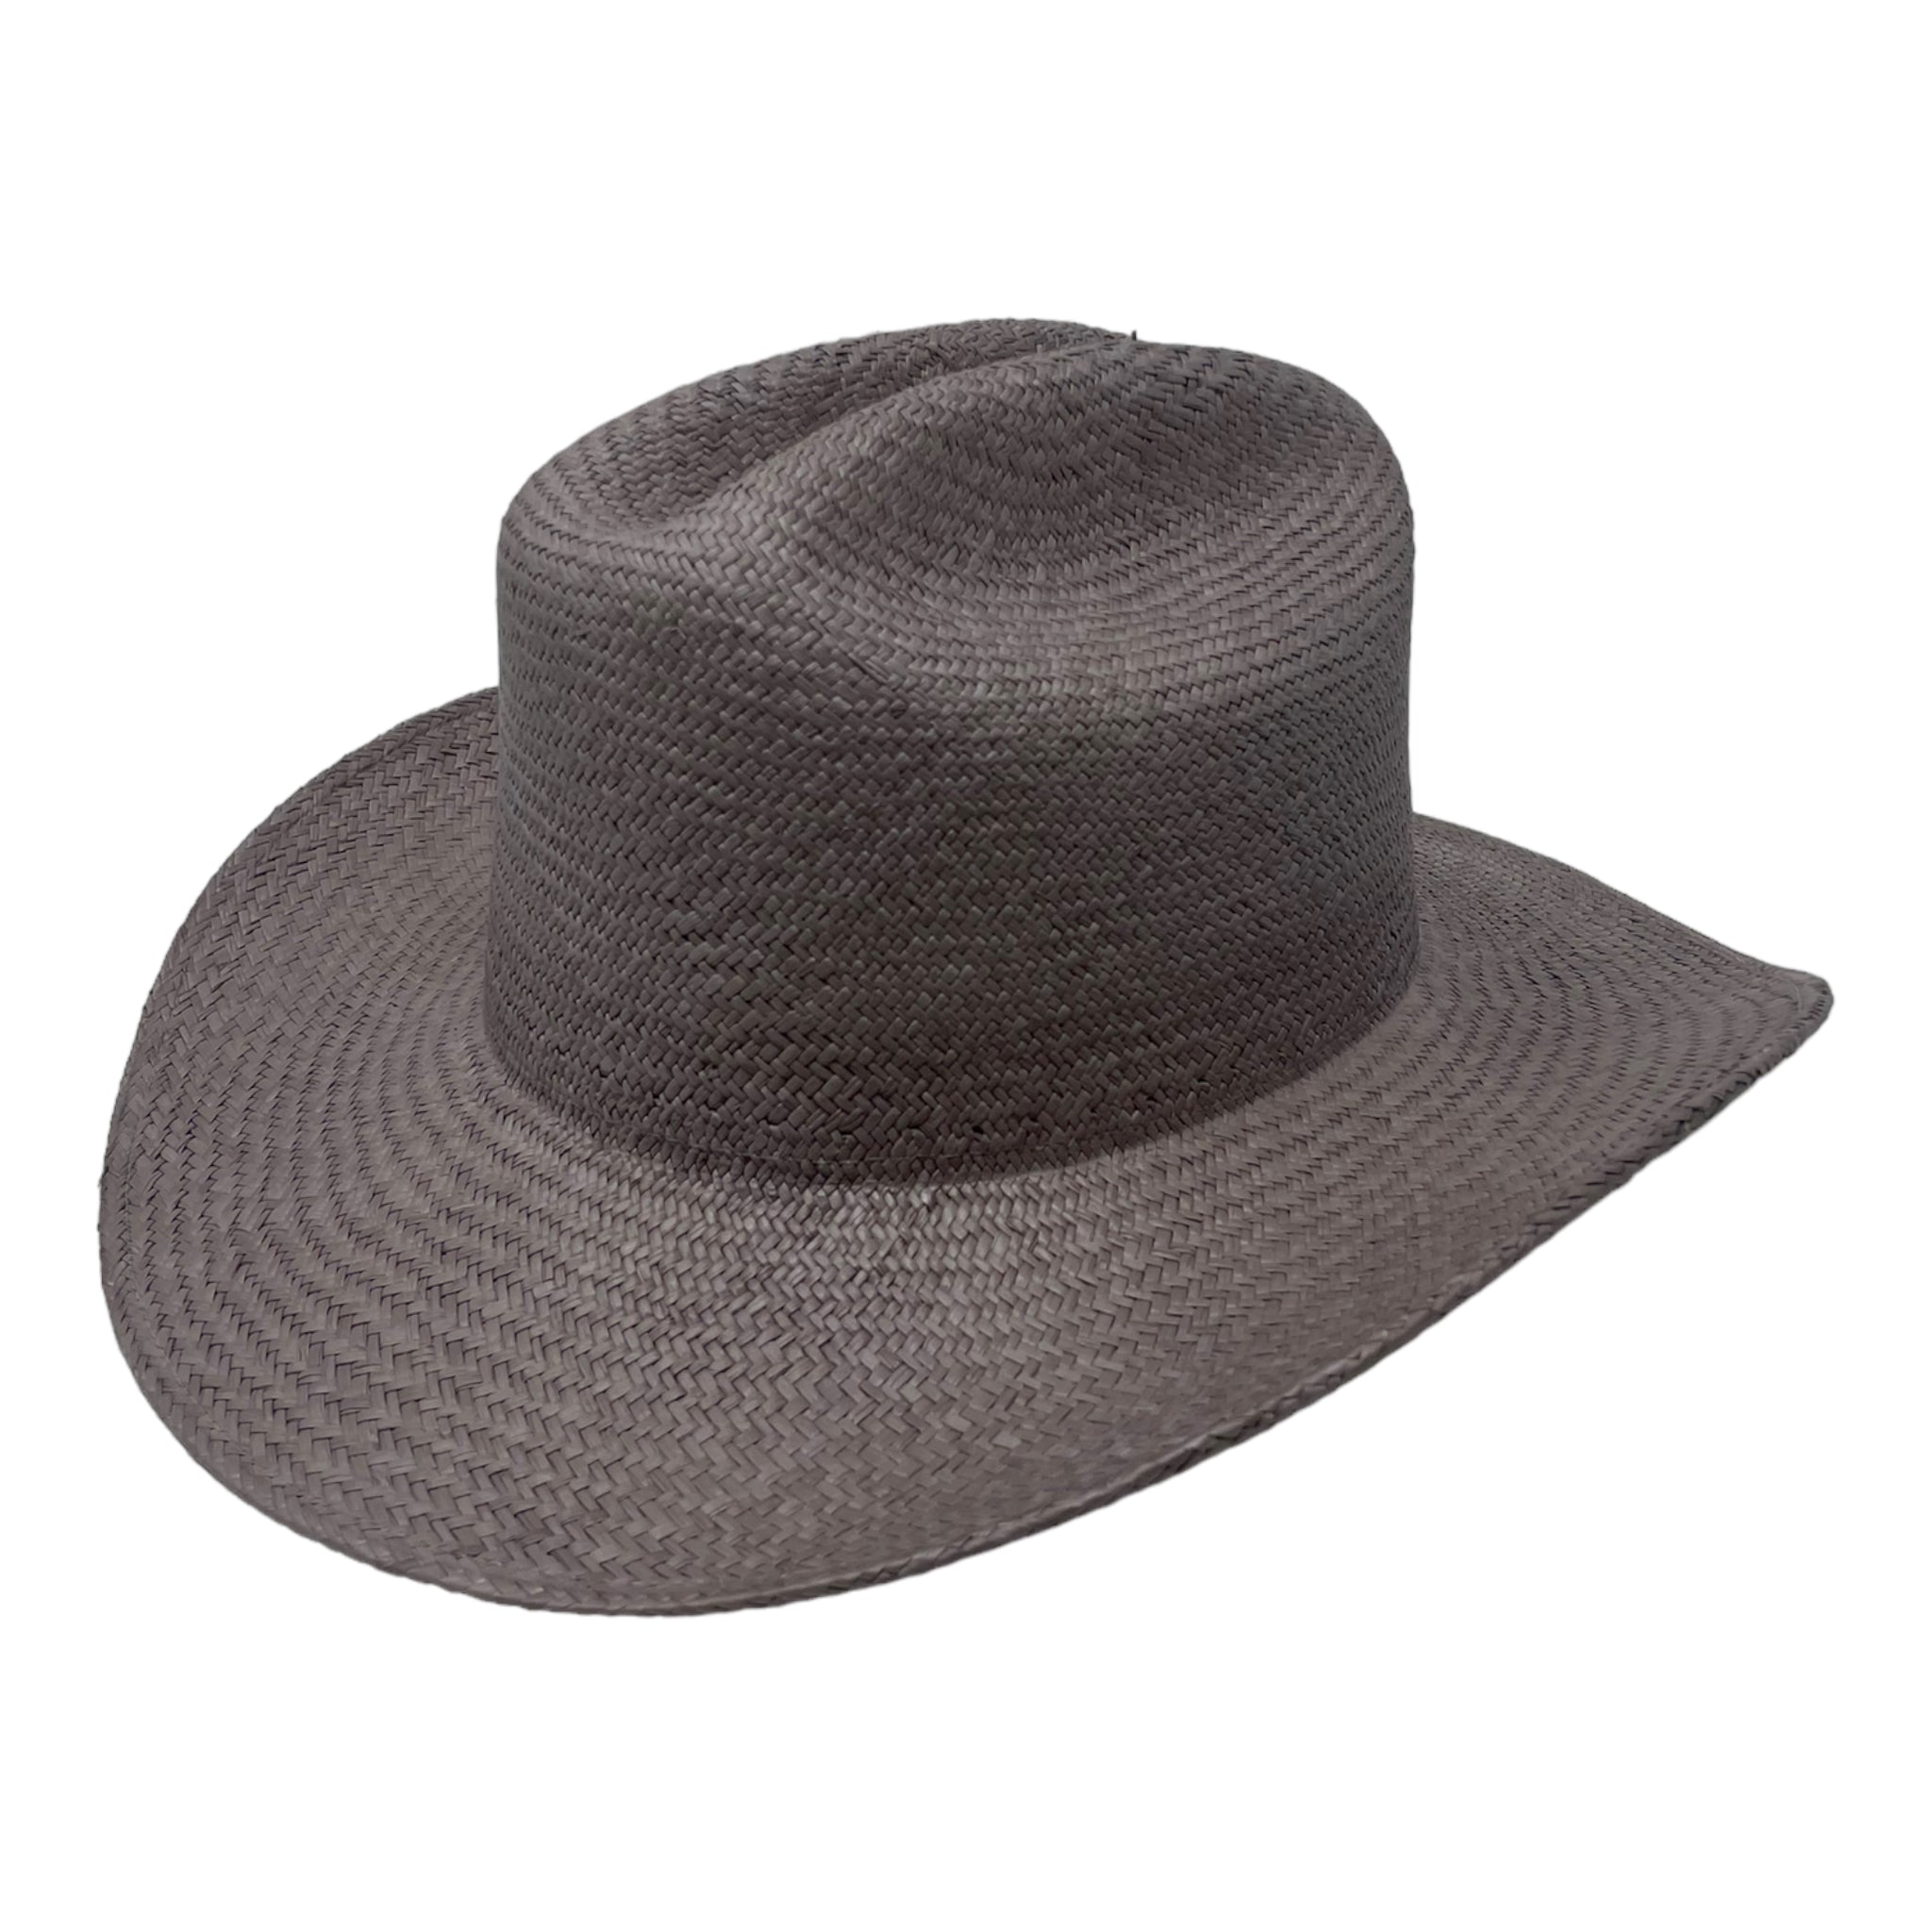 Cowboy Straw - Multiple Colors